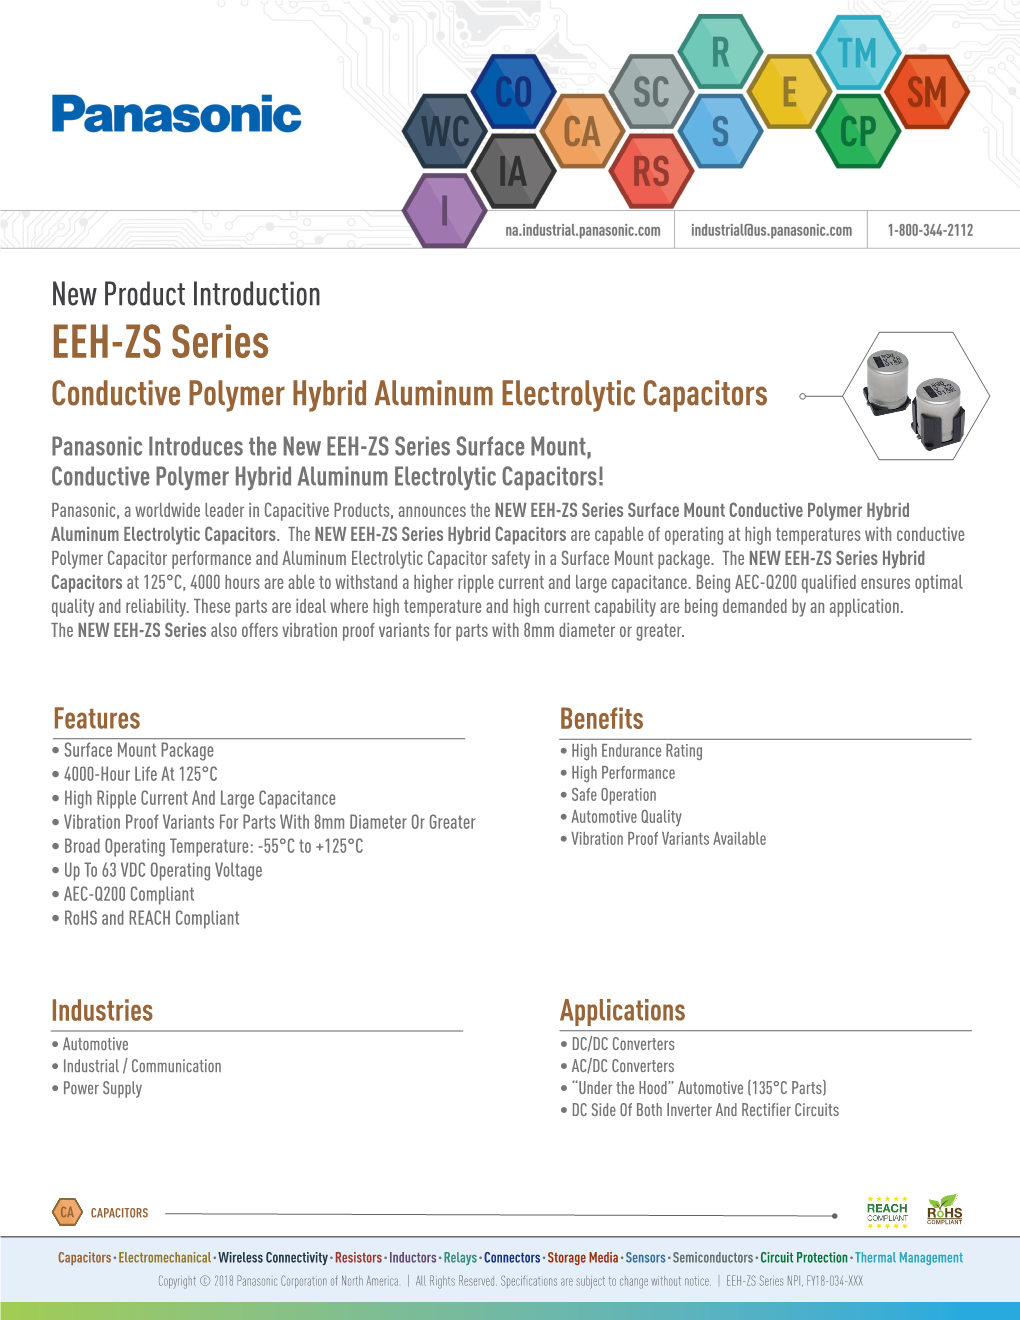 EEH-ZS Series Conductive Polymer Hybrid Aluminum Electrolytic